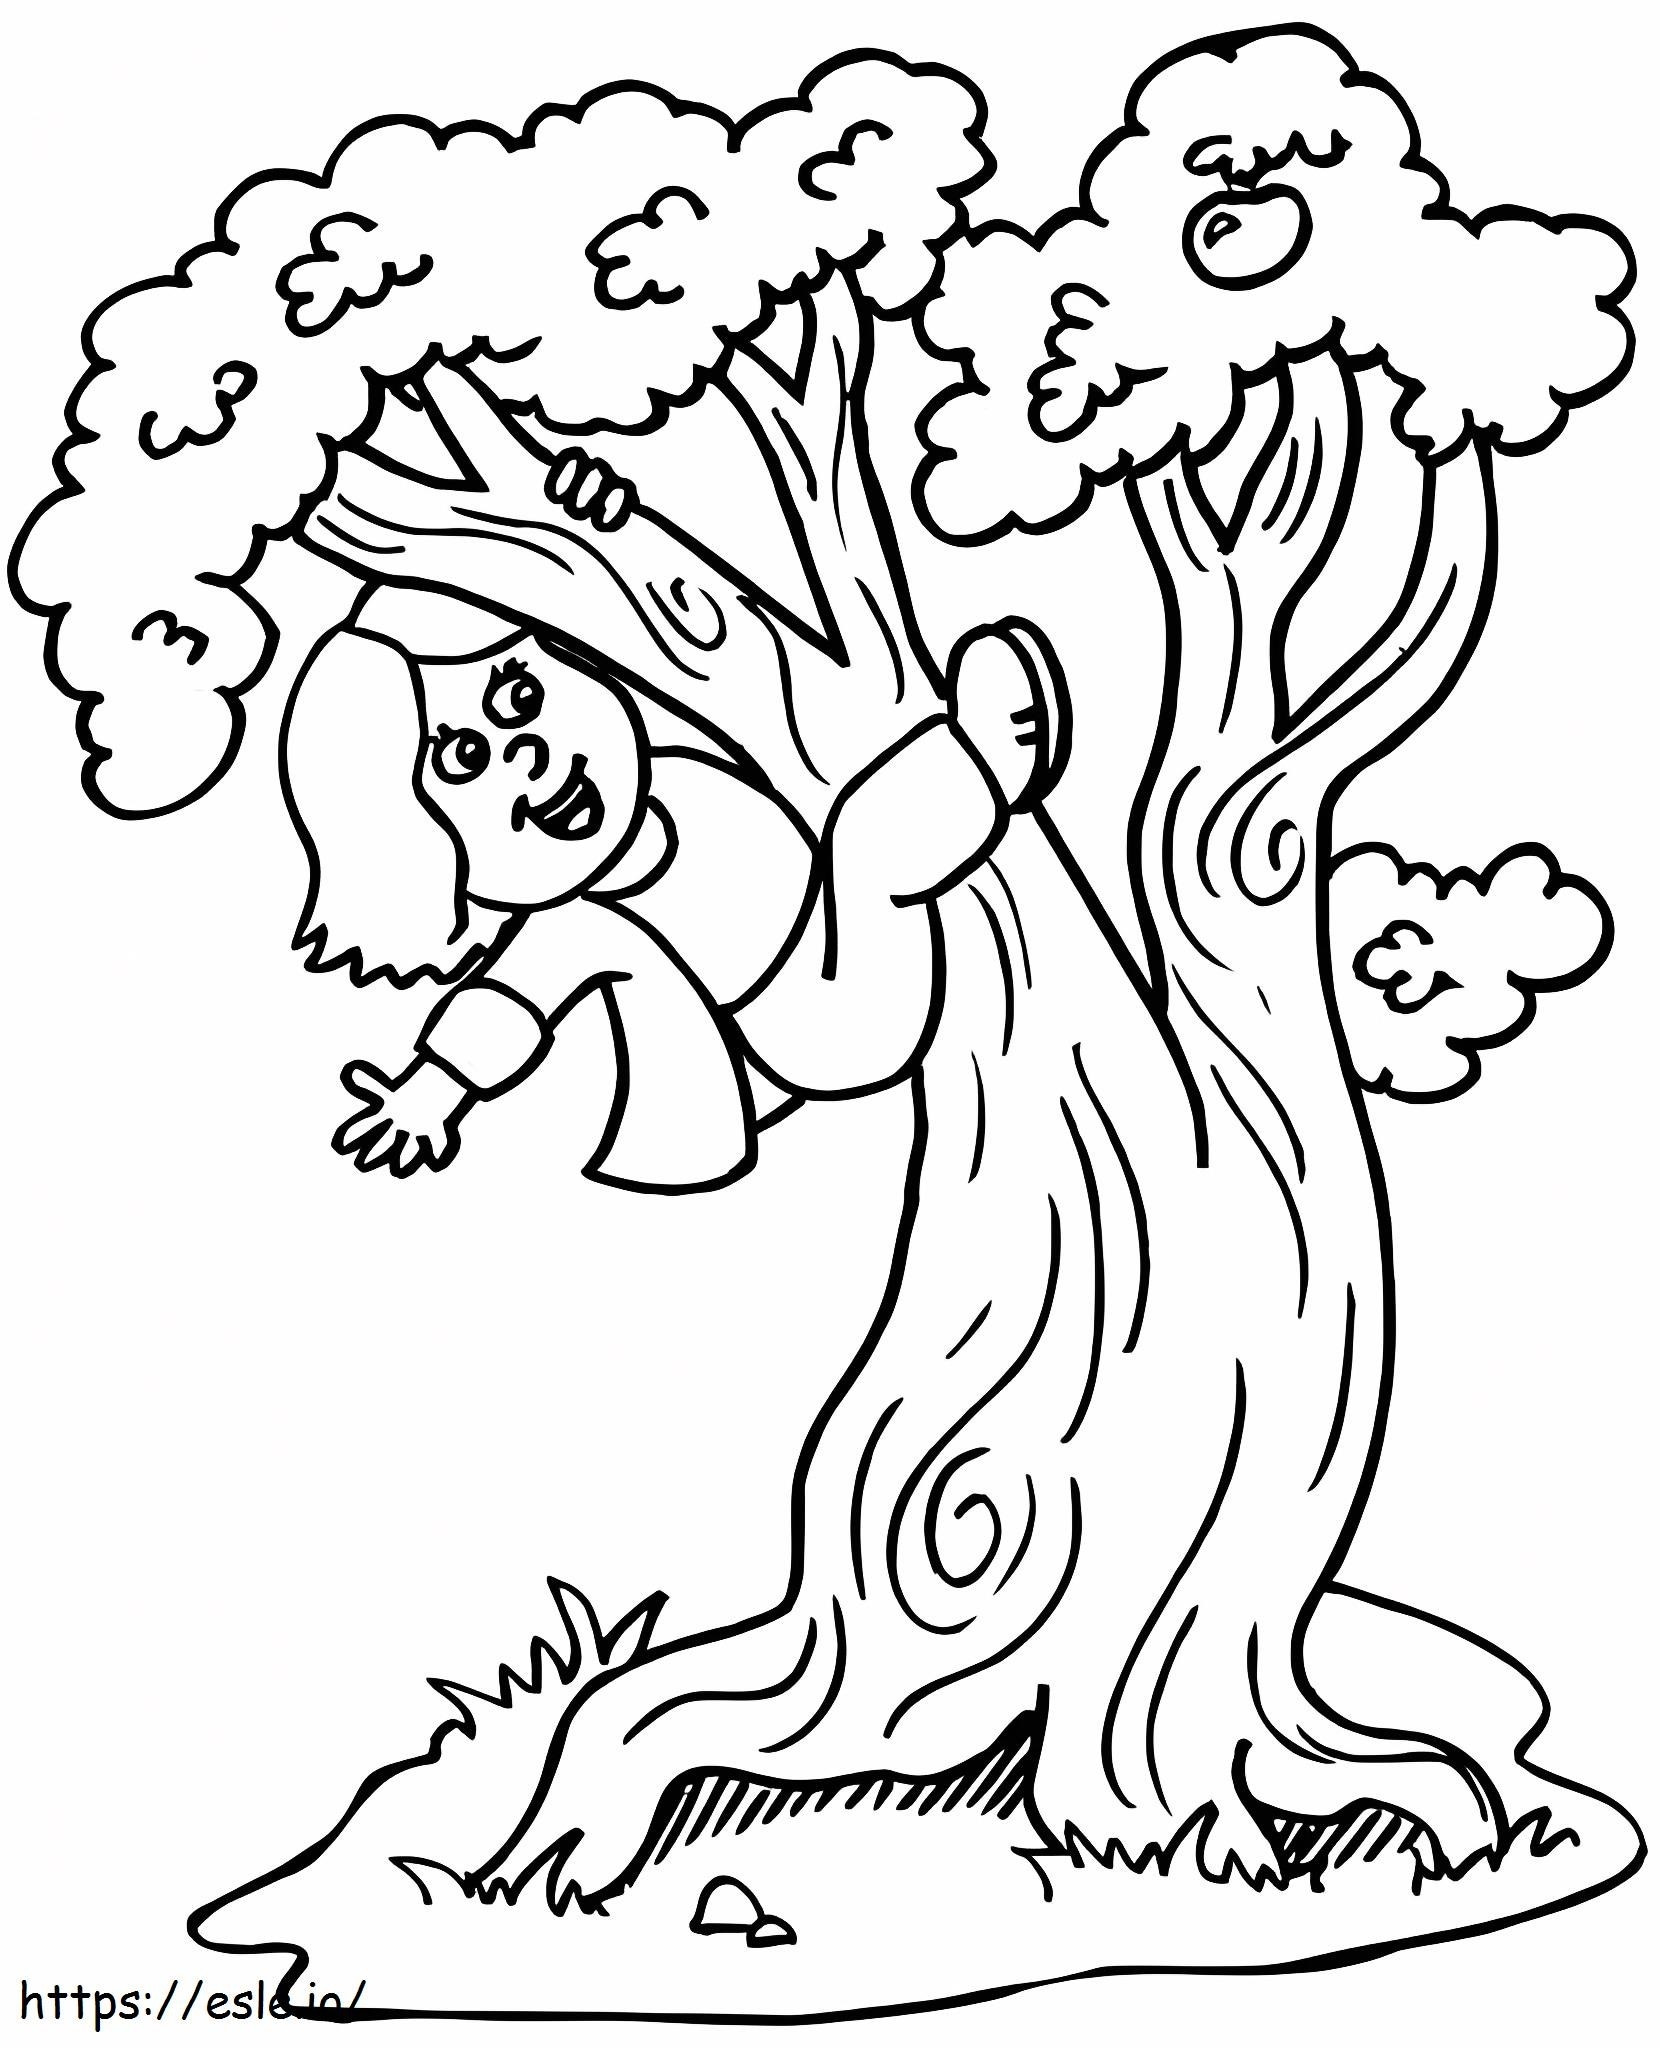 Girl Climbing Trees coloring page